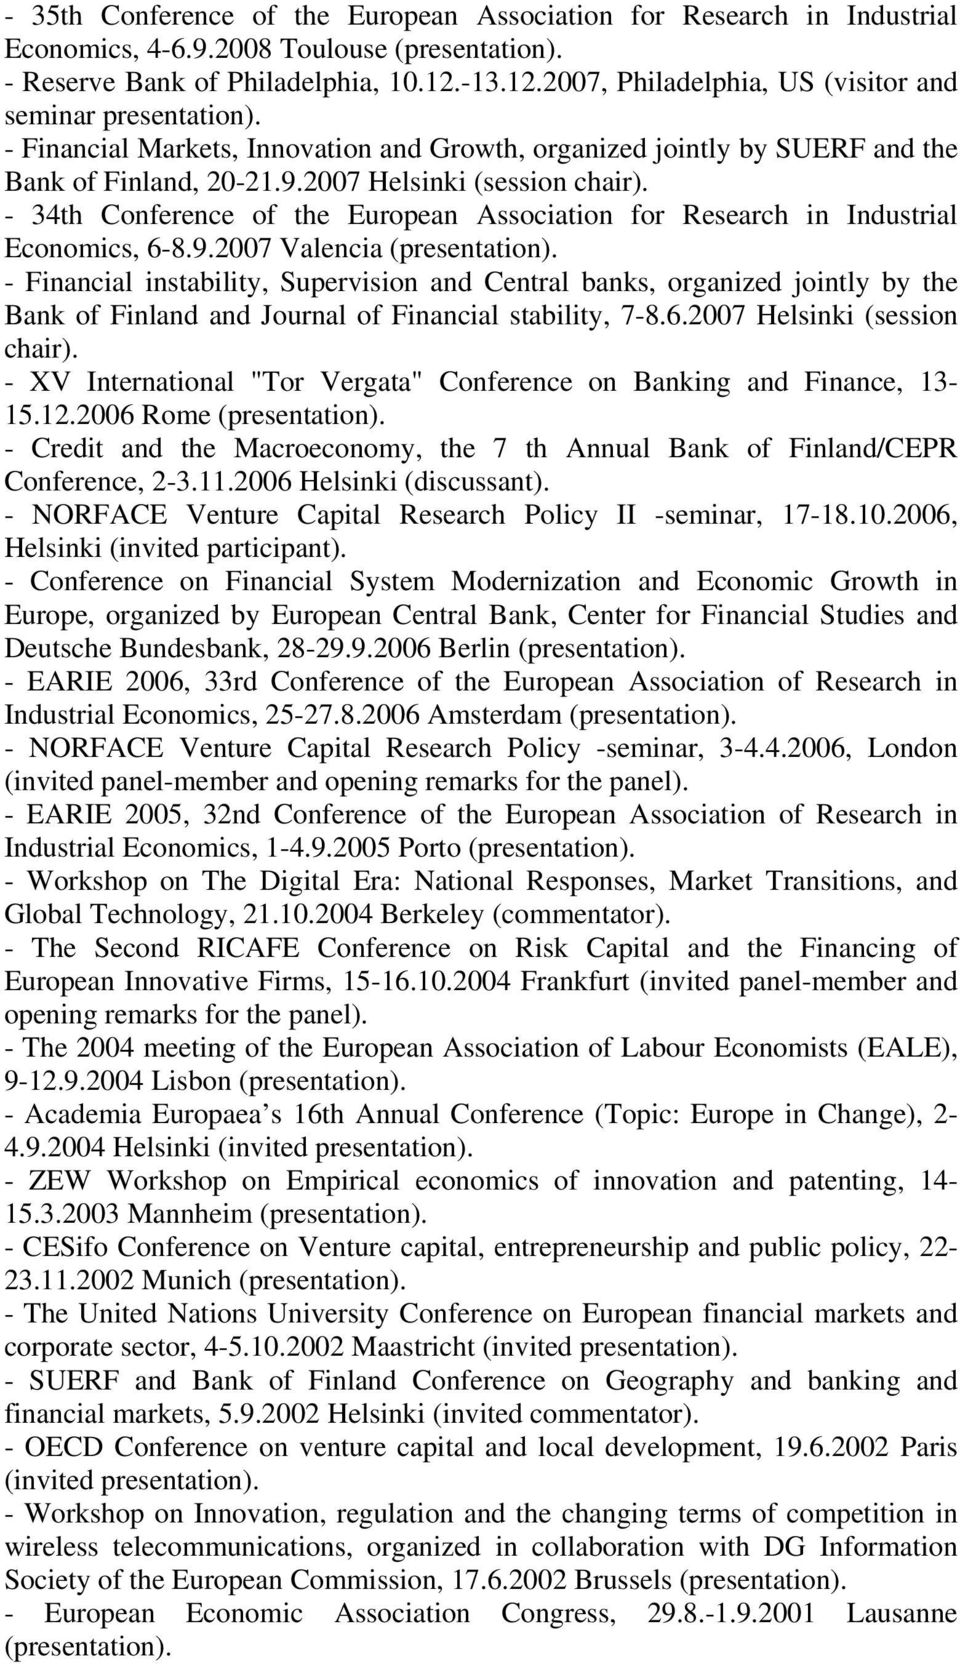 - 34th Conference of the European Association for Research in Industrial Economics, 6-8.9.2007 Valencia (presentation).